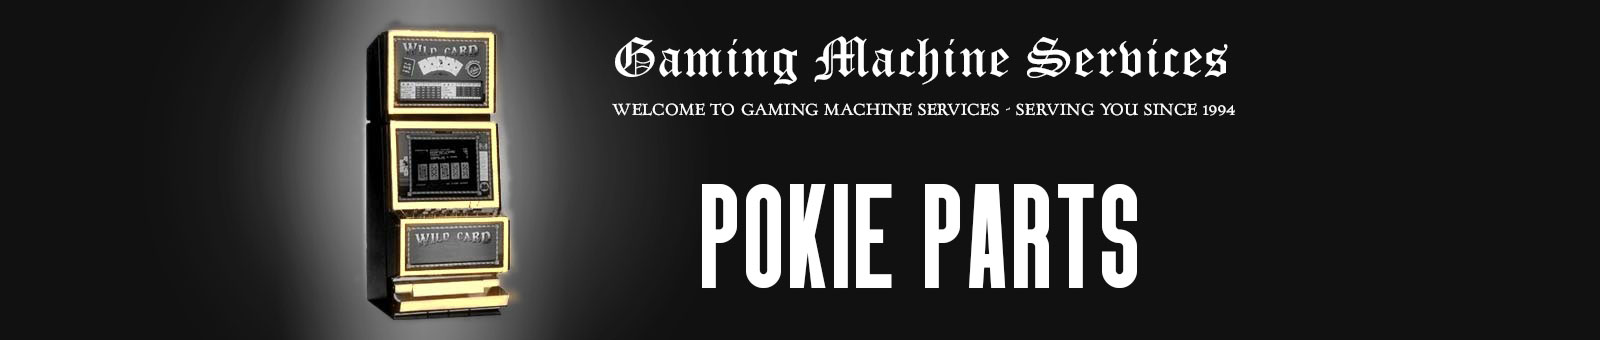 Gaming Machine Services - since 1994